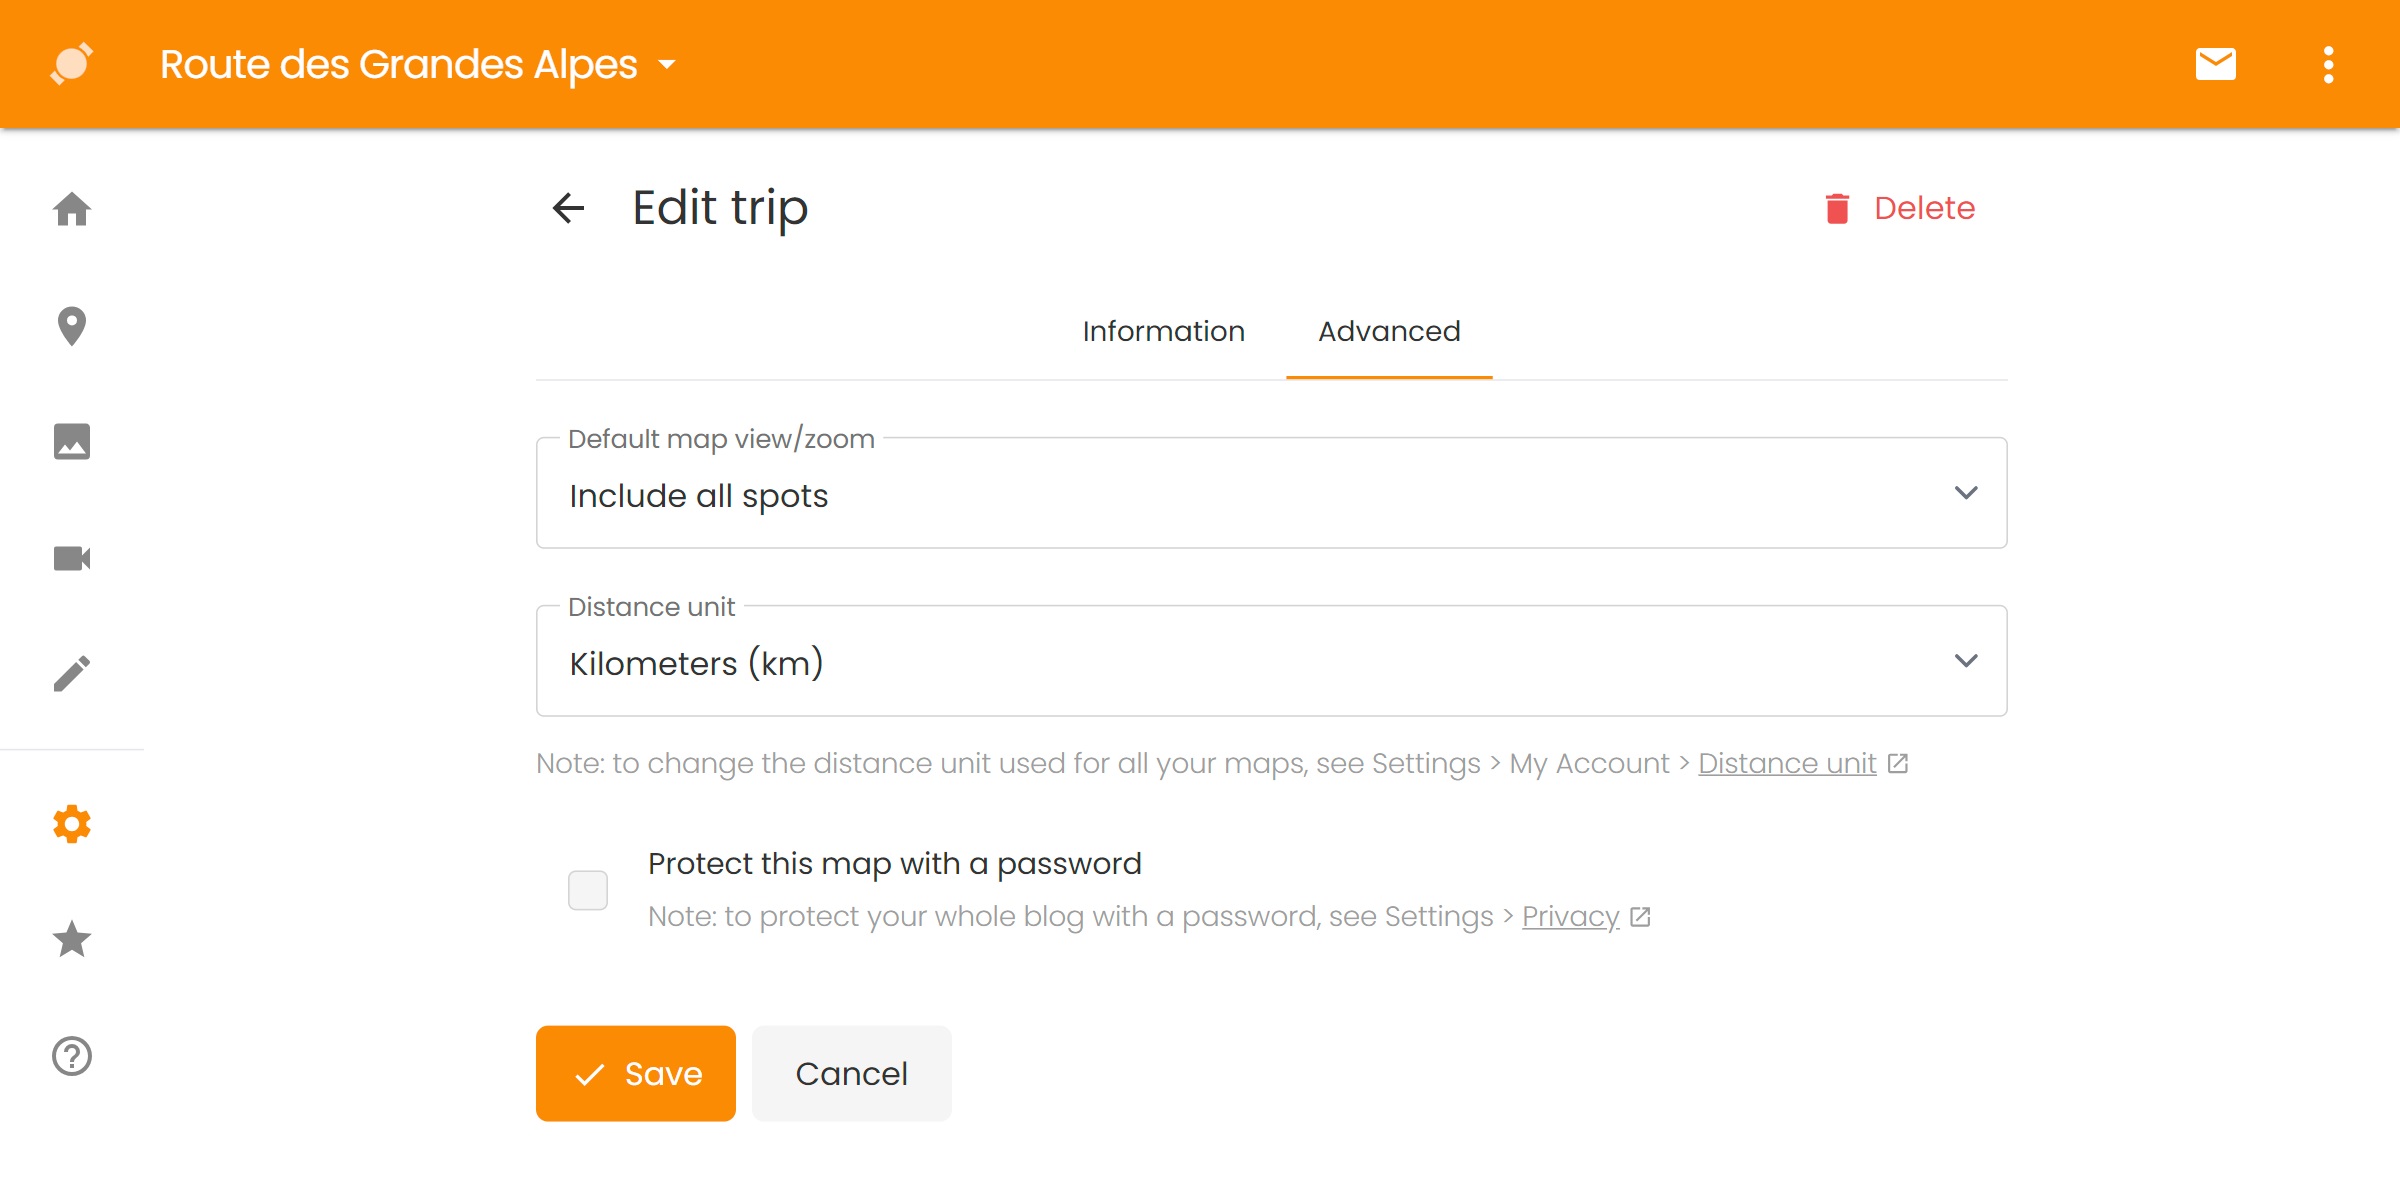 Interface to edit a trip on TravelMap